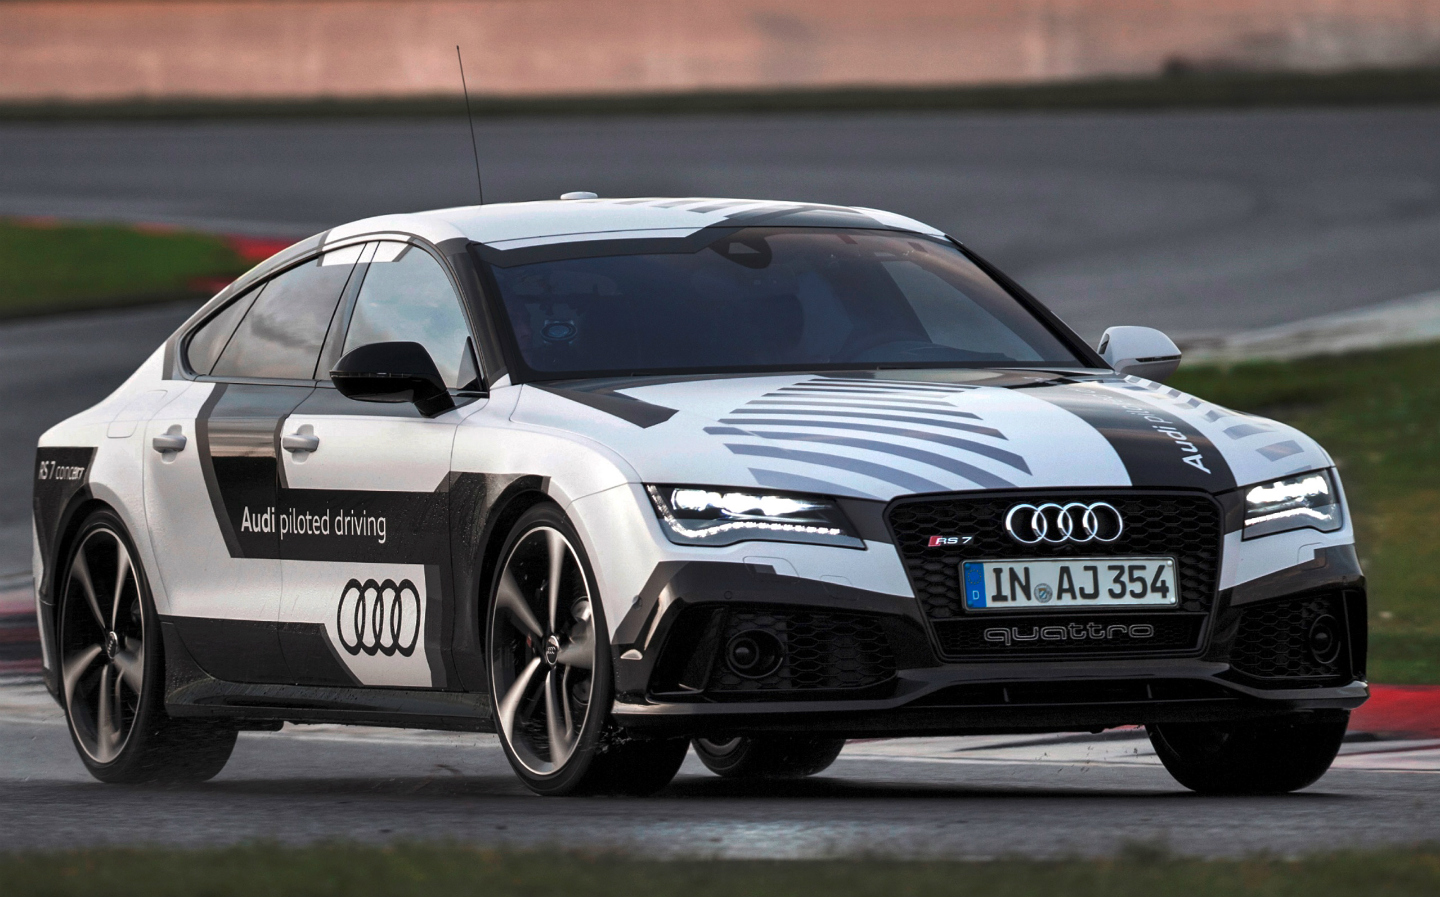 Video: Audi RS 7 laps Hockenheim at up to 149mph – without a driver (updated)